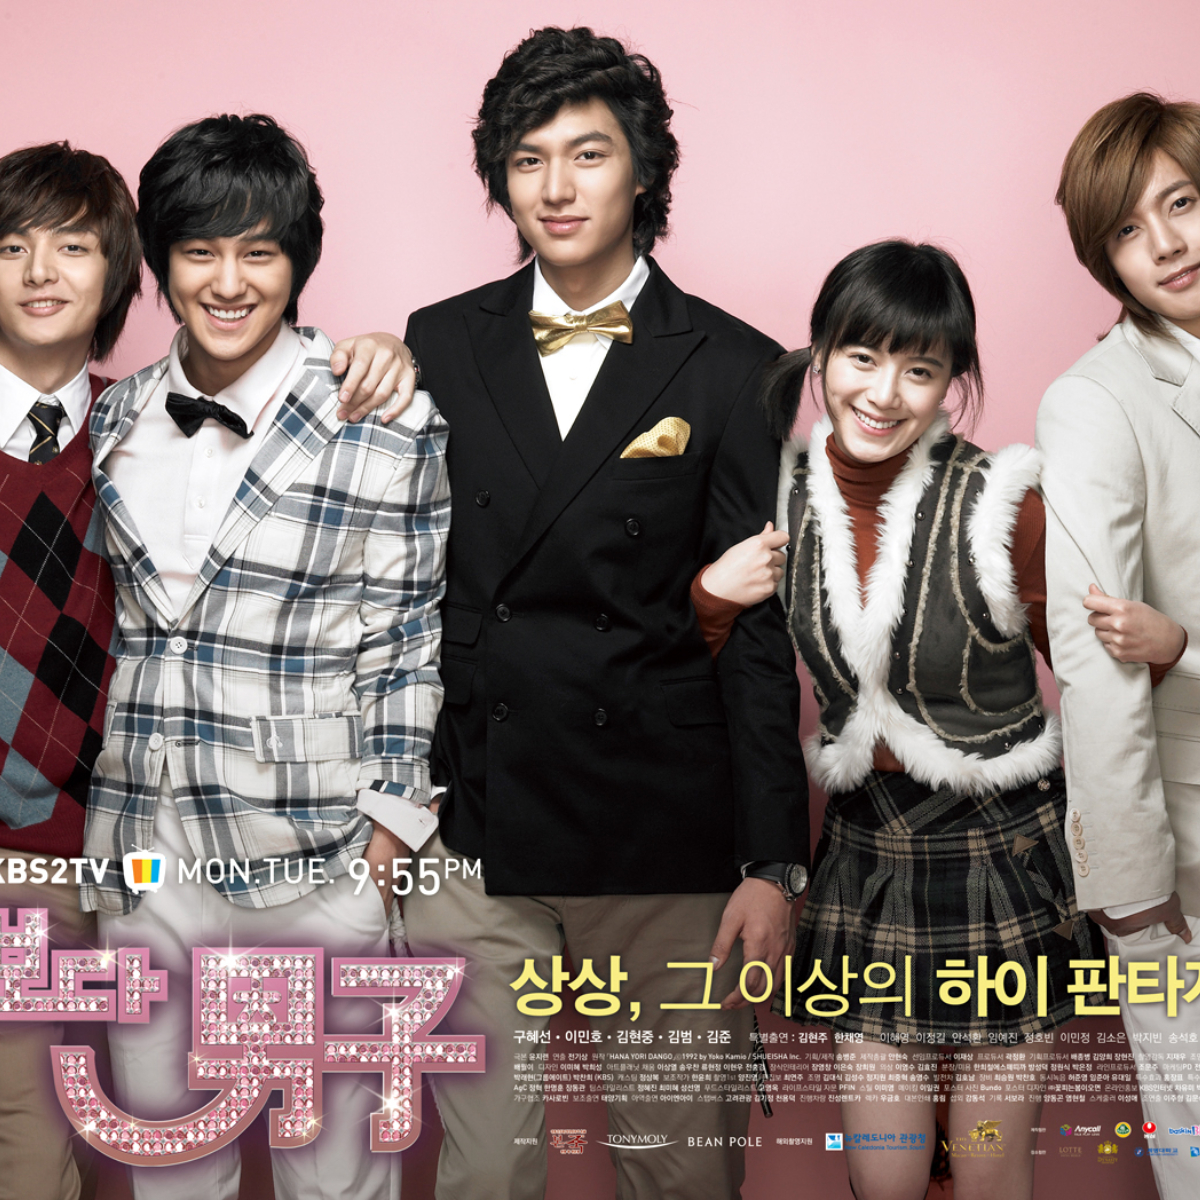 Boys Over Flowers aired in 2009